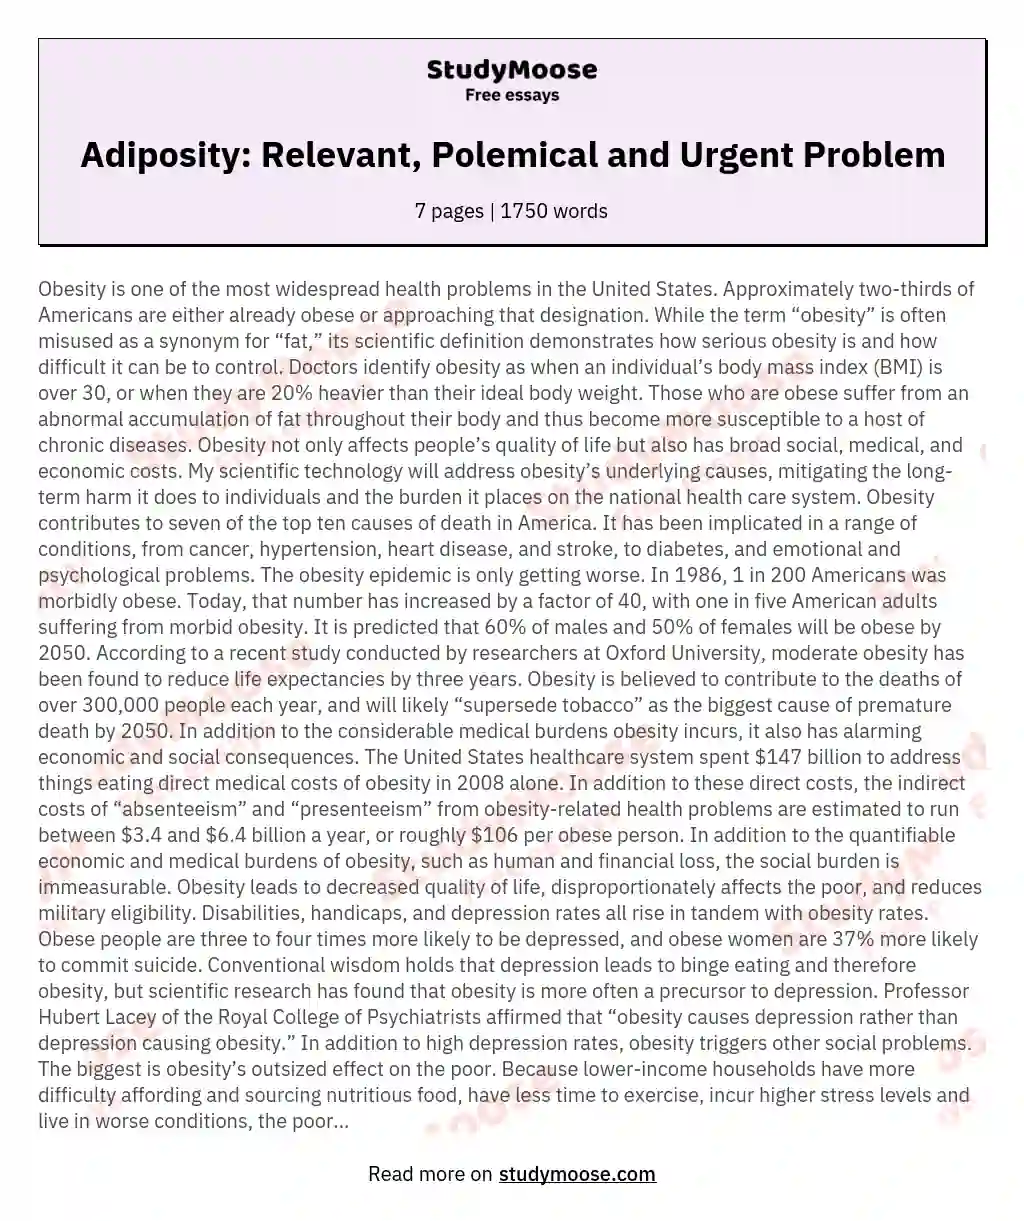 Adiposity: Relevant, Polemical and Urgent Problem essay